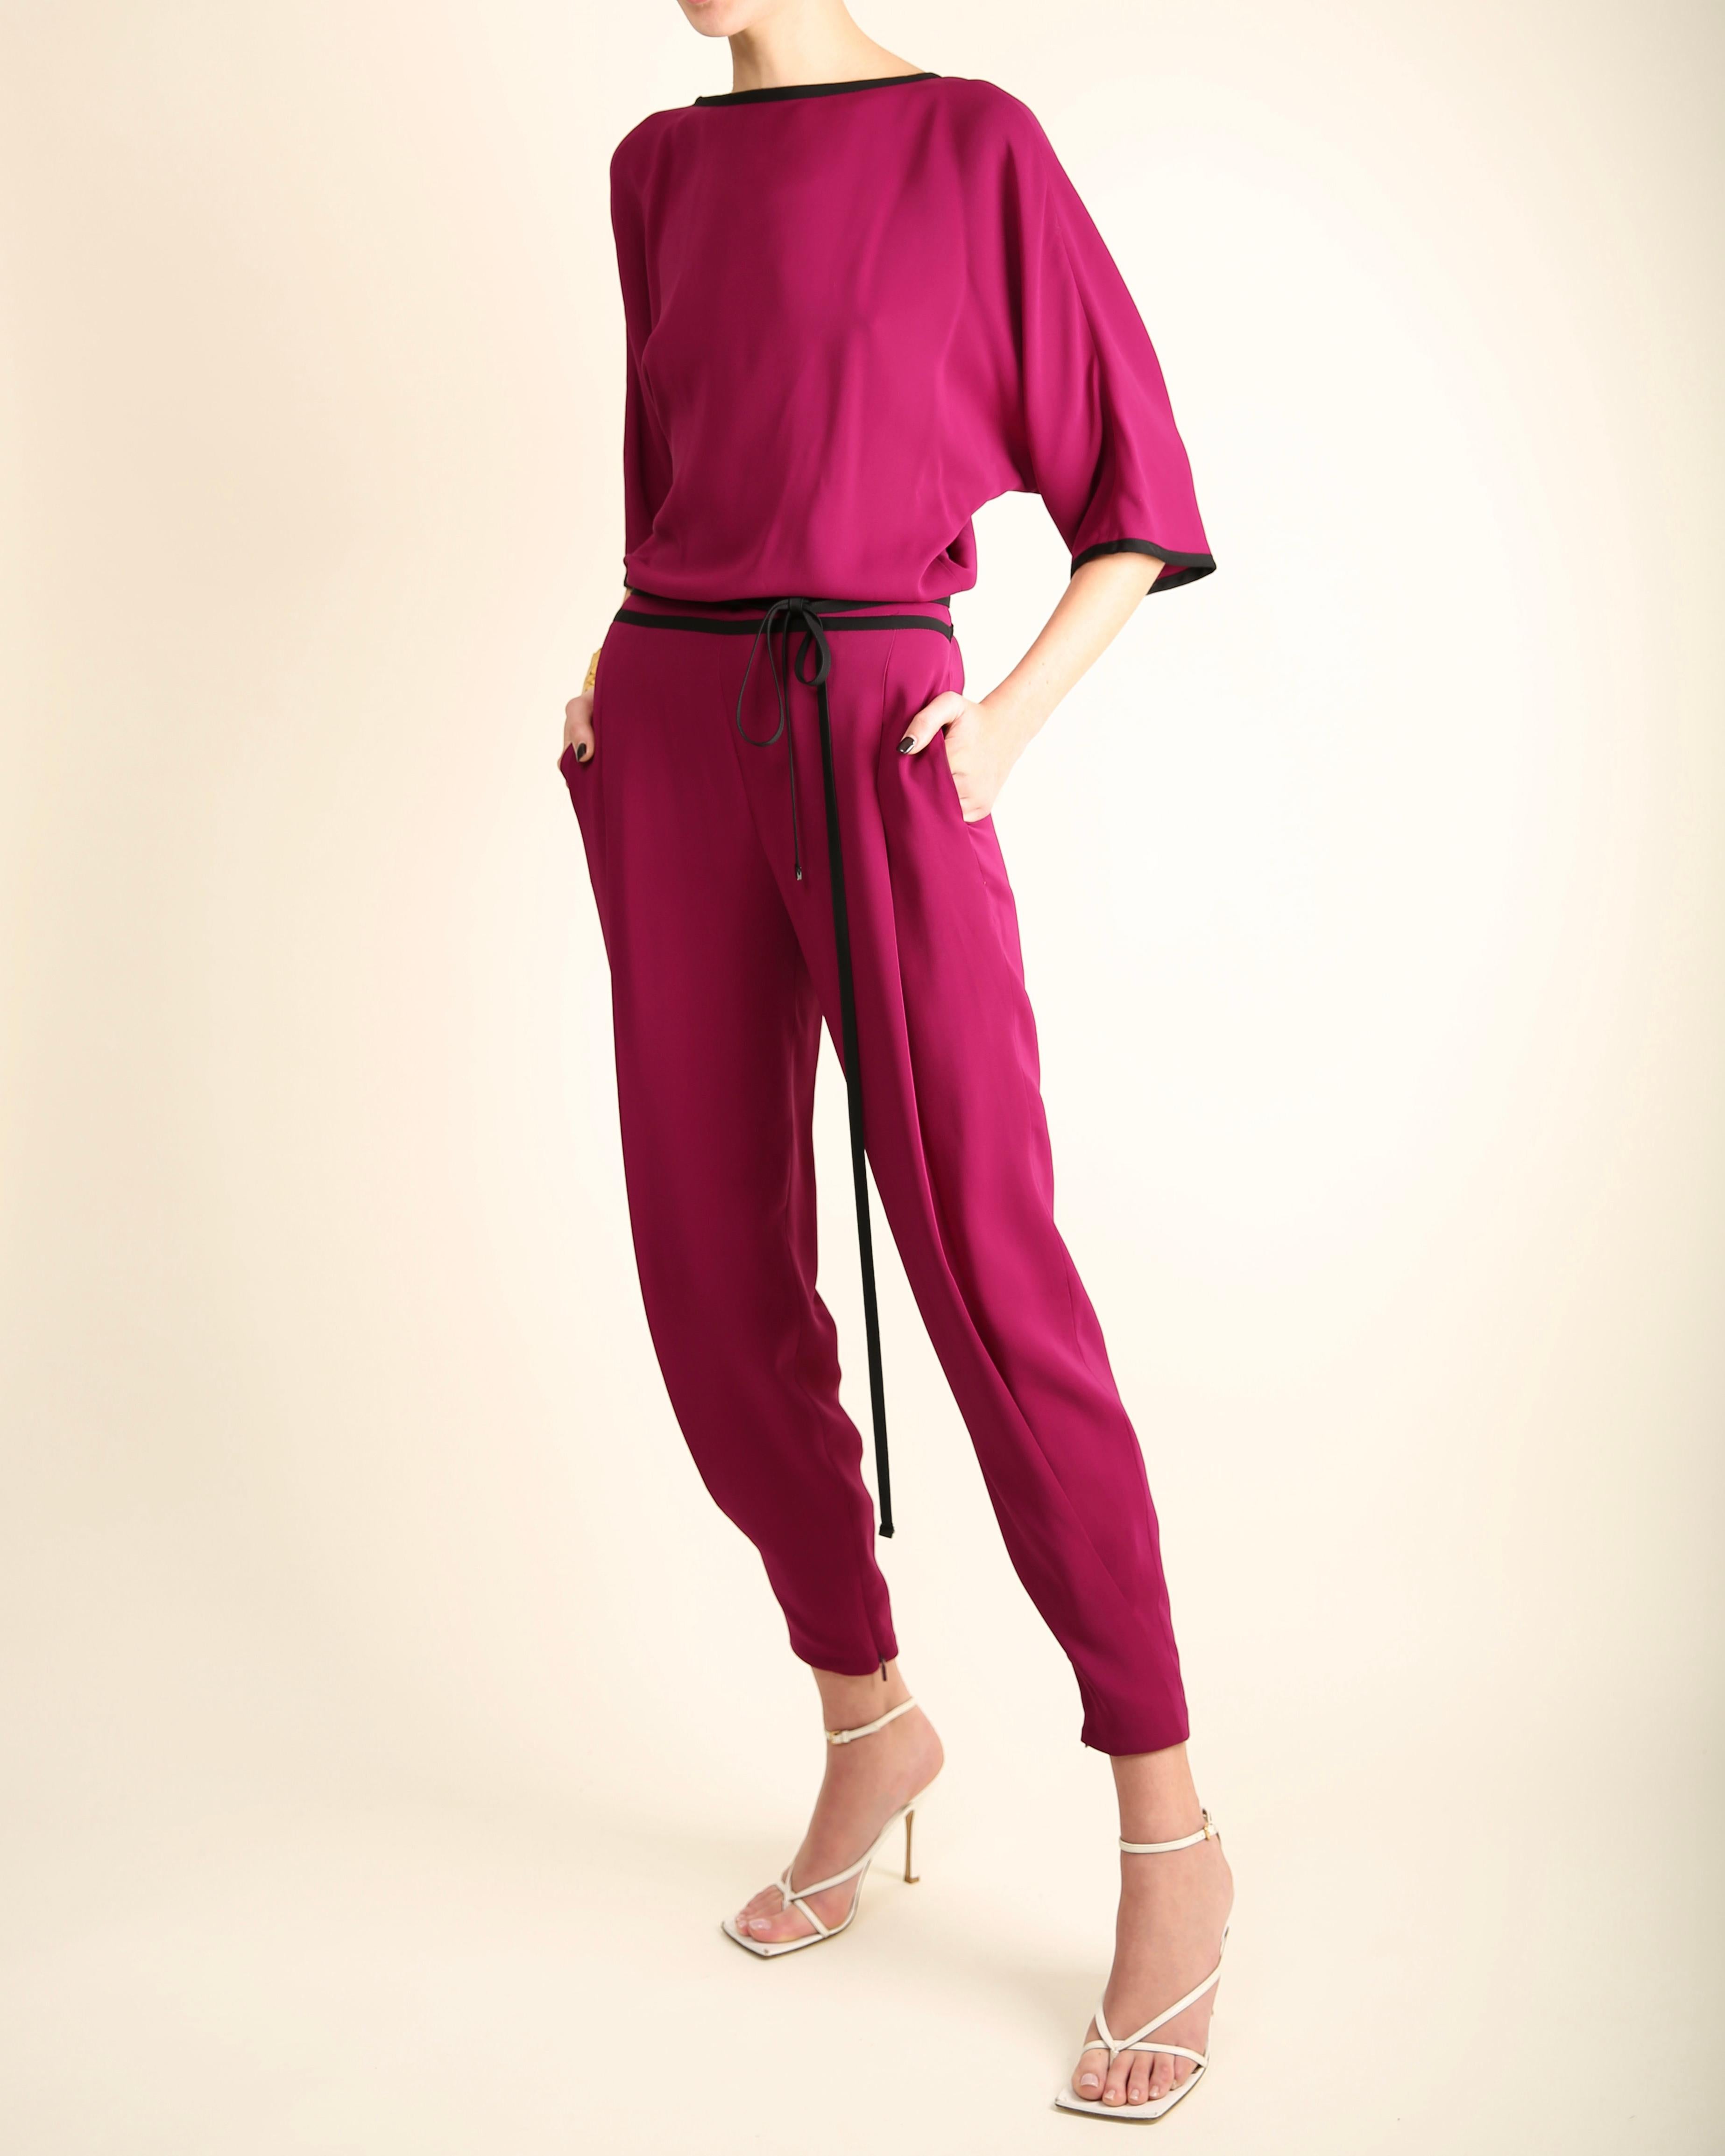 Gucci S/S 2014 silk magenta black backless dolman tapered pant jumpsuit  For Sale 2